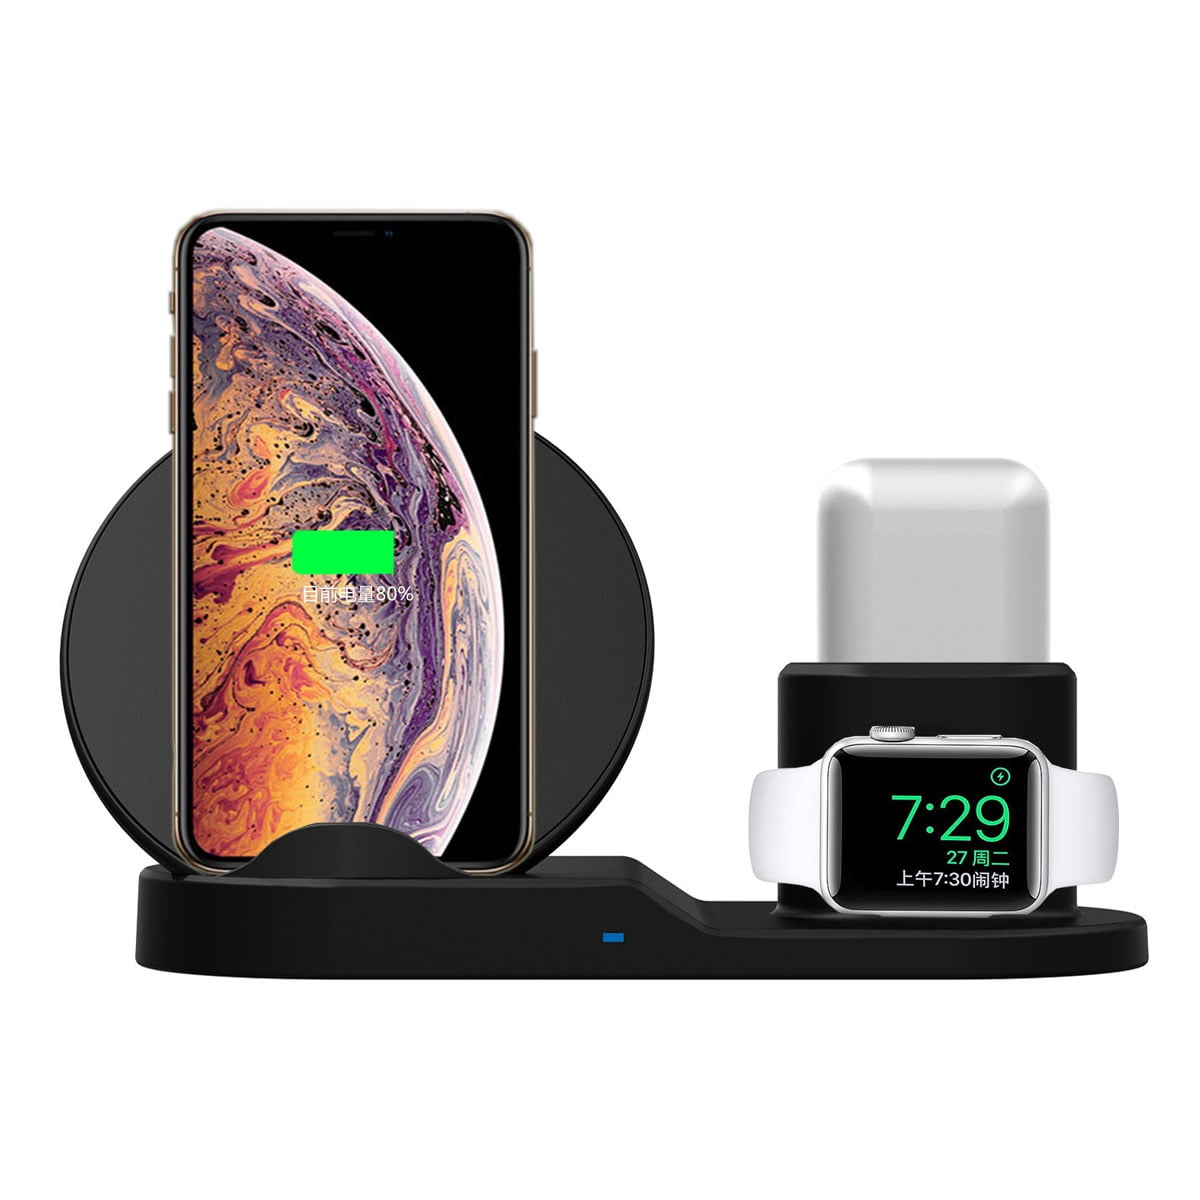 Galaxy S20 S10 11 Pro Max Note 10 No AC Adapter 11 Pro 9 11 Cecomo 3 in 1 15W Fast Wireless Charging Pad Black AirPods Compatible with iPhone 12 